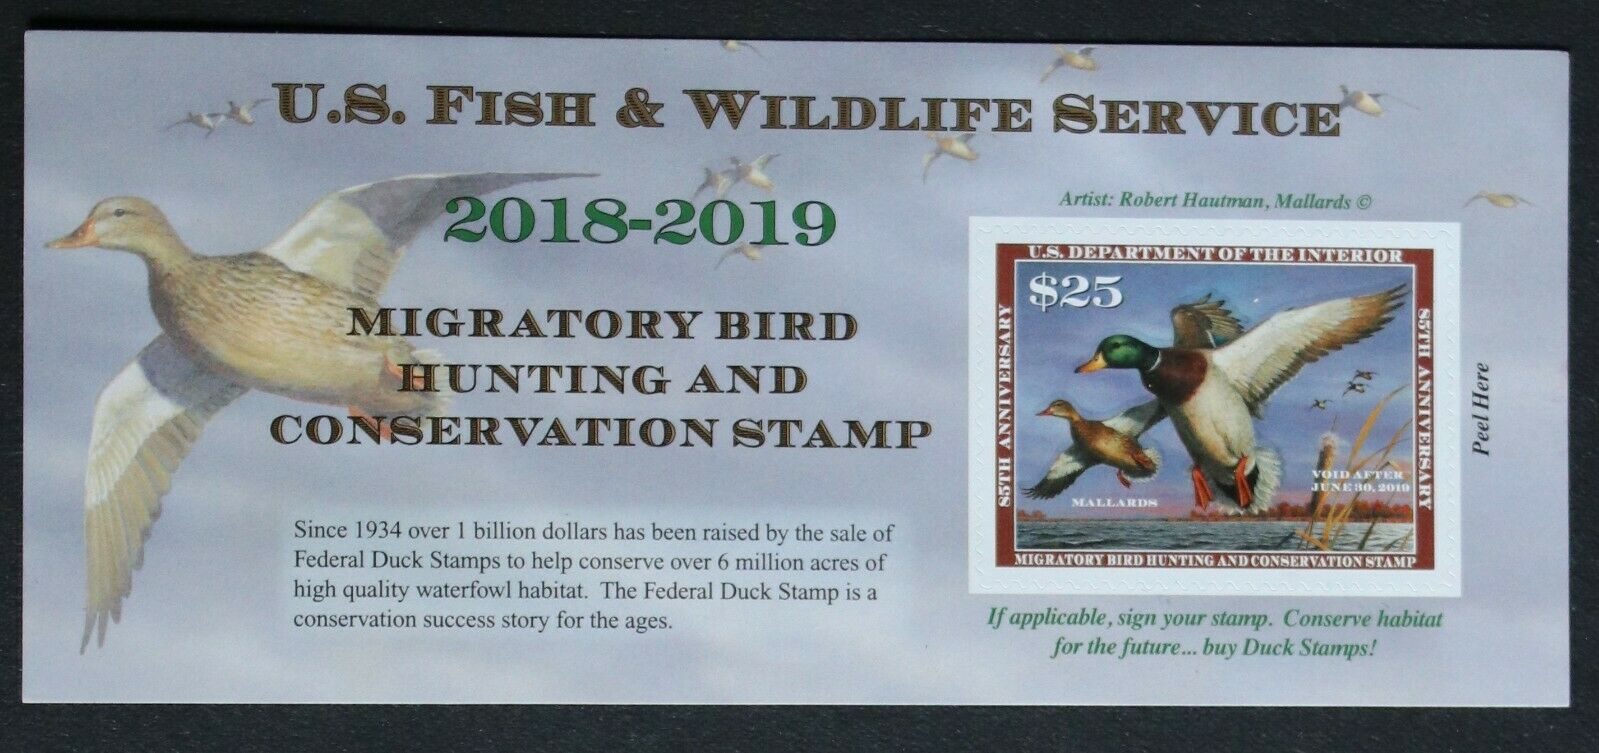 Federal Duck Stamp Rw 85a 2018-2019